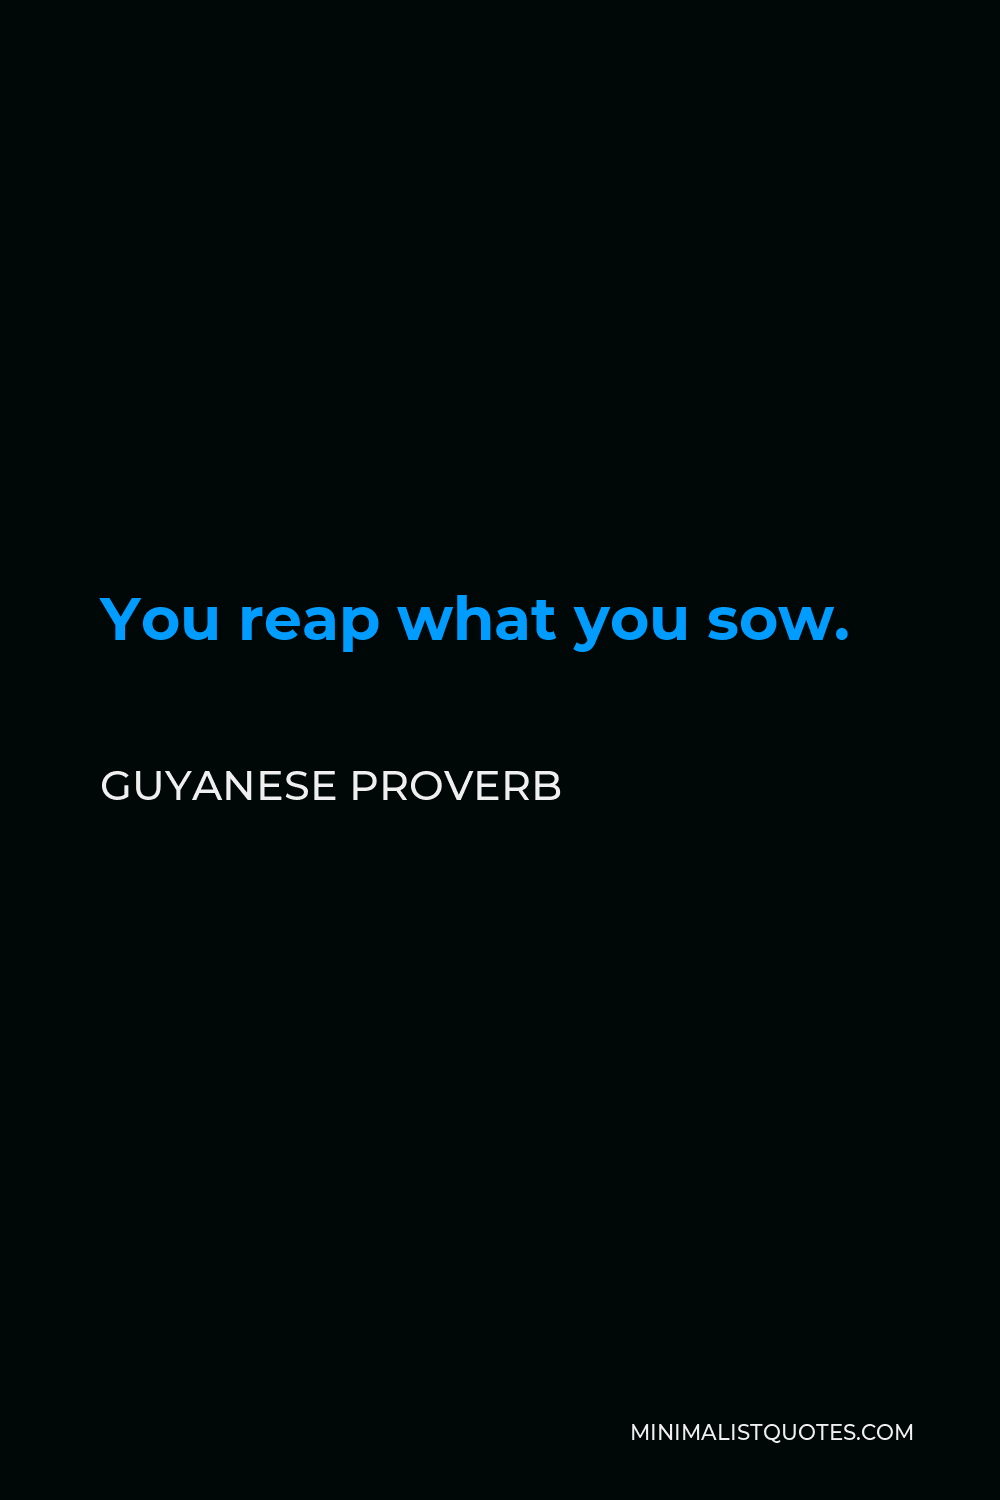 Guyanese Proverb Quote - You reap what you sow.